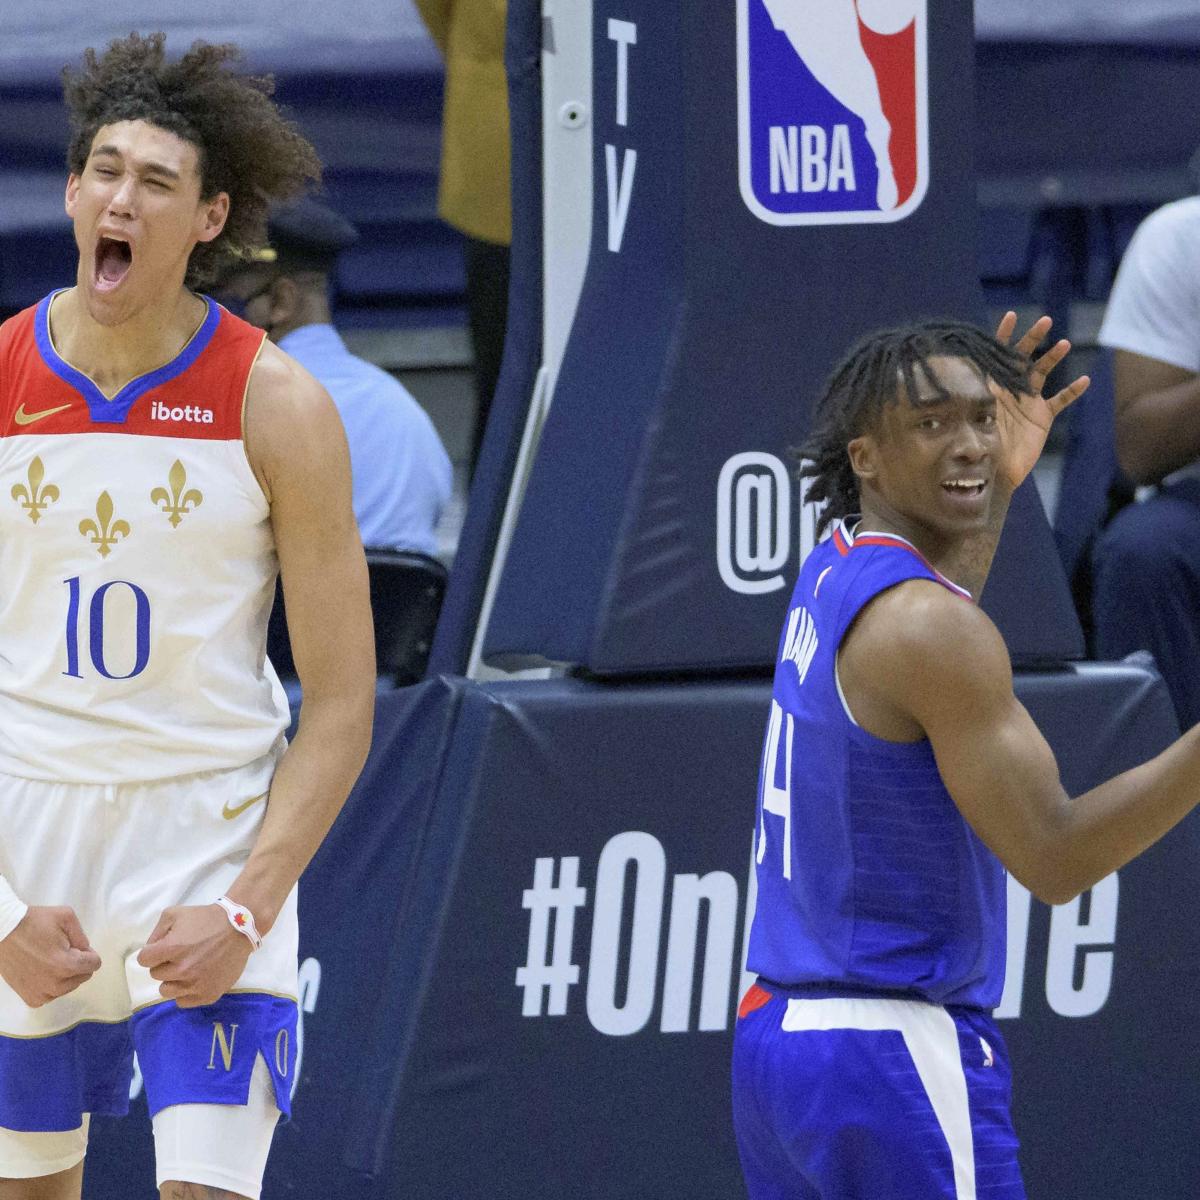 Zion Williamson, Lonzo Ball Energy Pelicans to Rout of Kawhi Leonard, Clippers